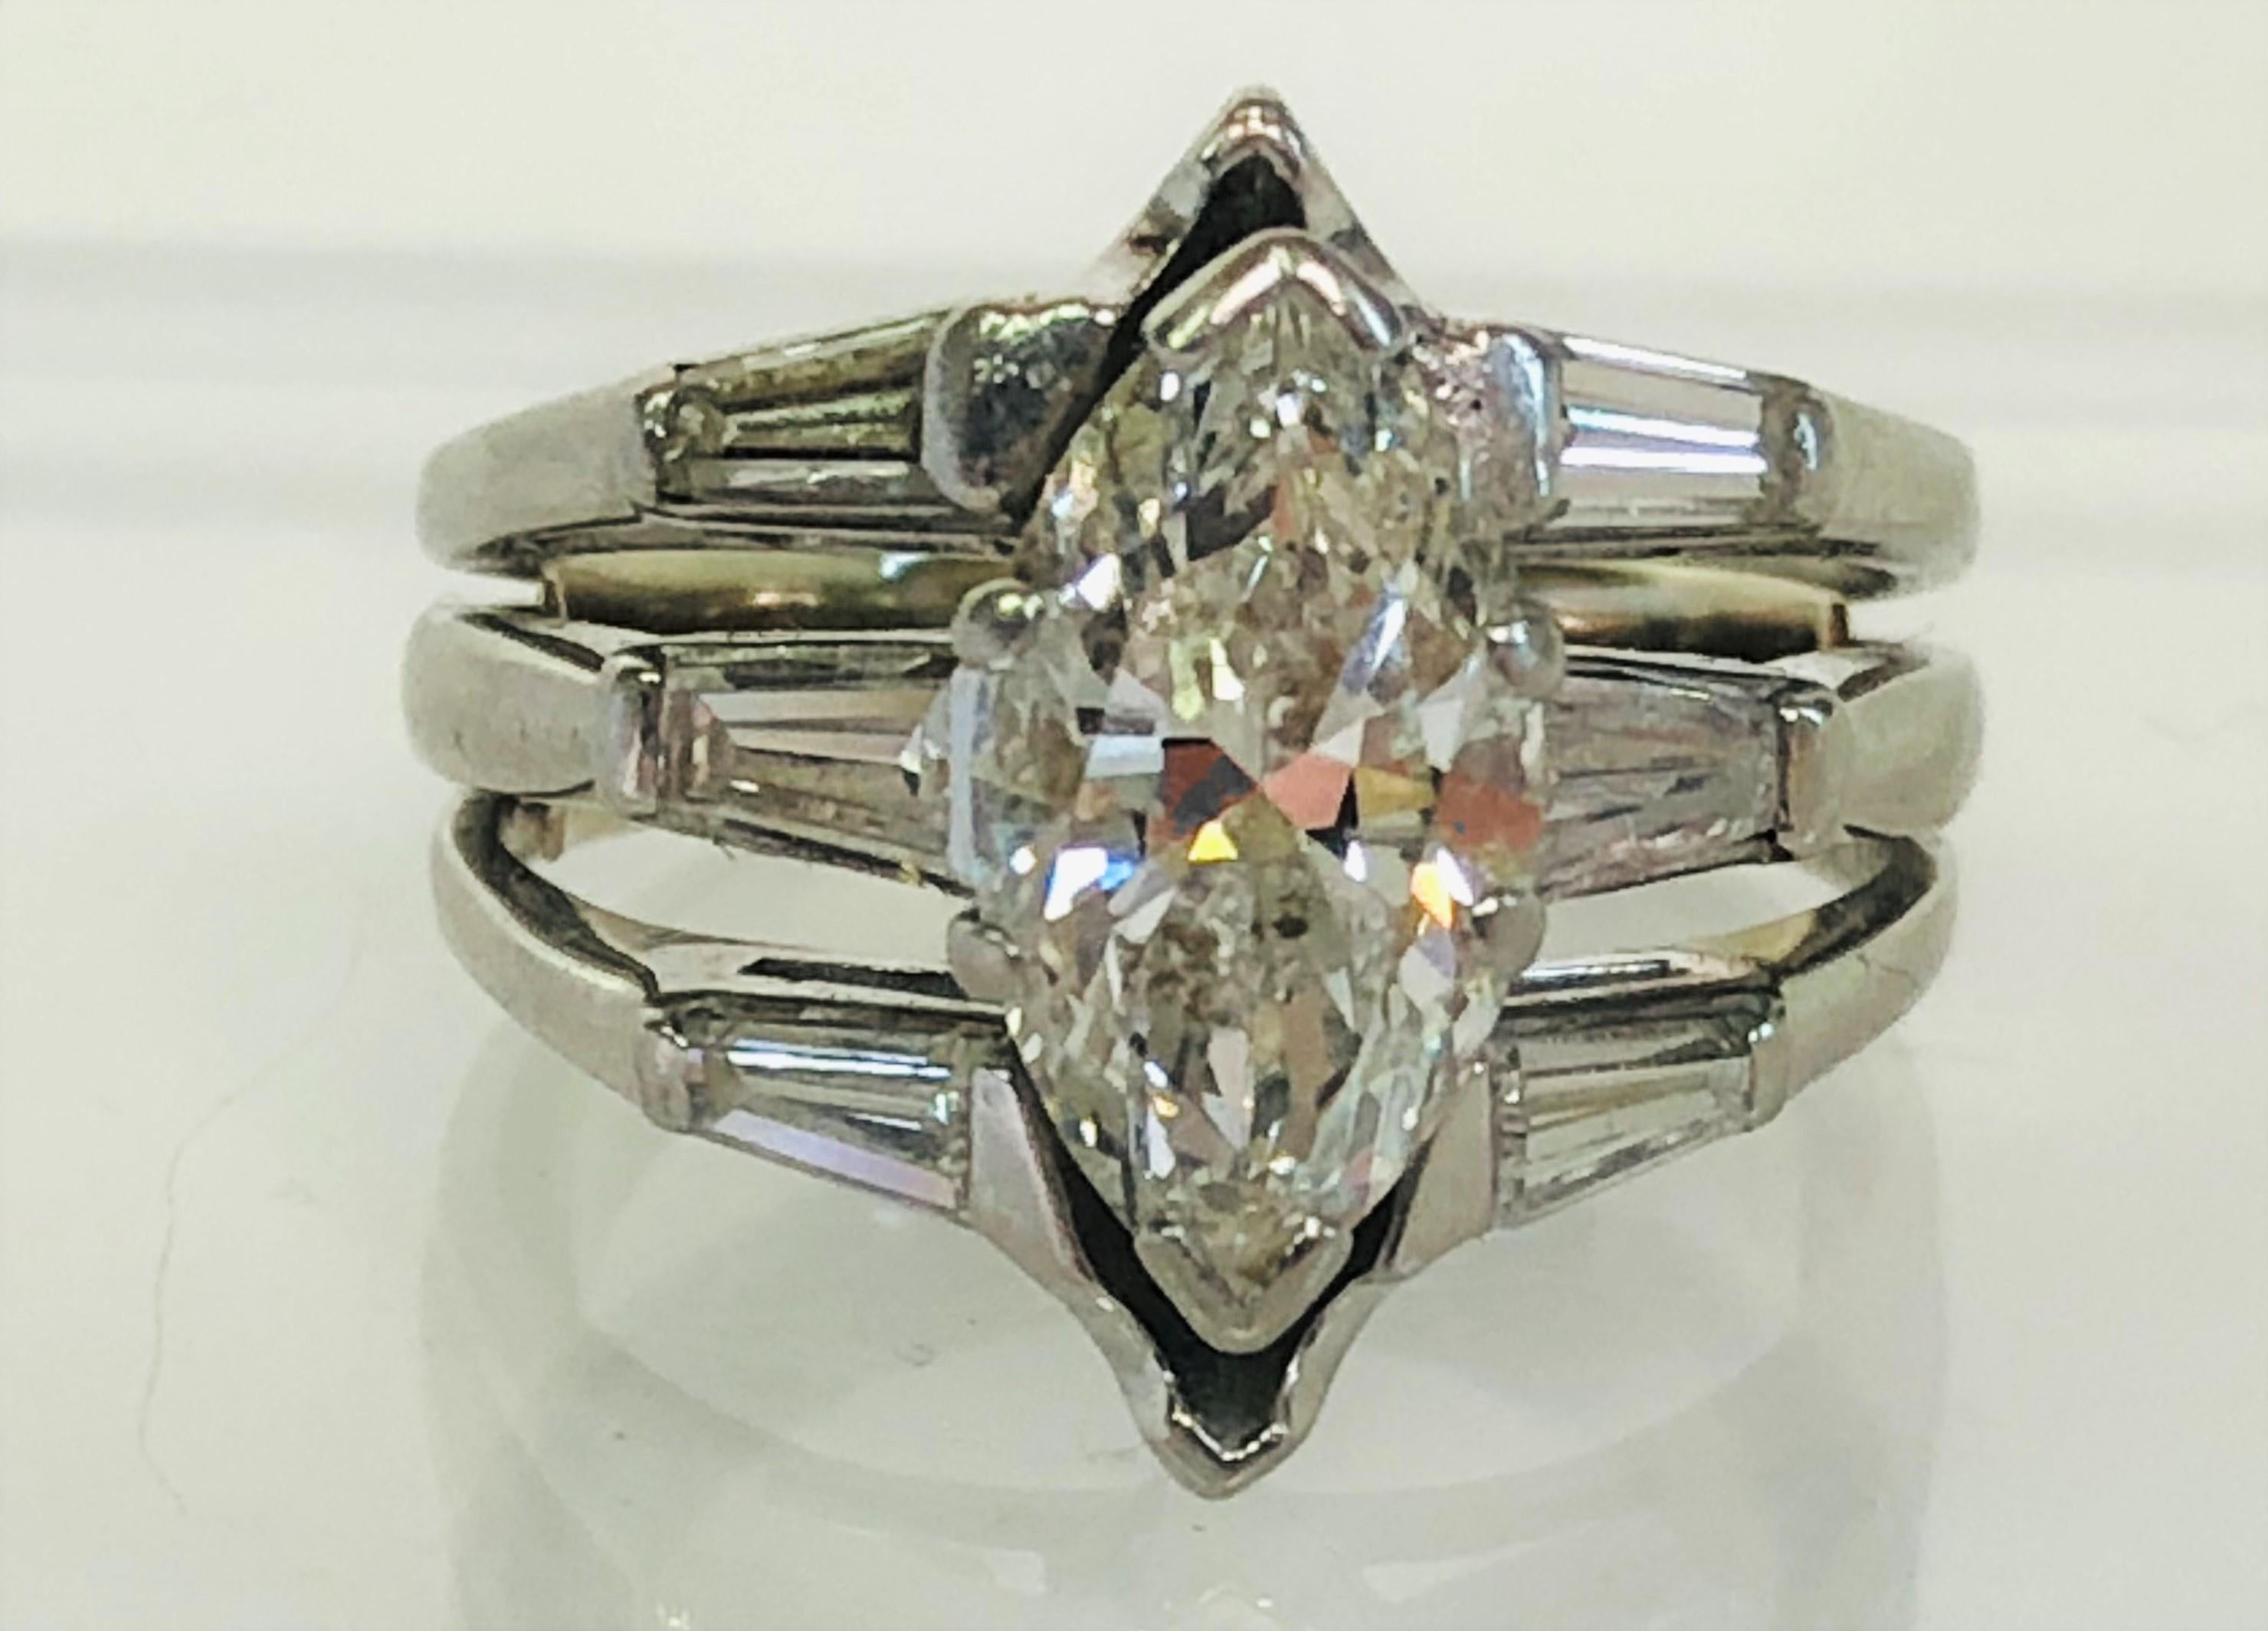 This ring sparkles from across the room!
Center marquise cut diamond approximately 2.33ct, I-J color, SI clarity
Six tapered baguette diamonds, approximately .11ct each.  One baguette has small chip
Size 6 (with inner horseshoe shank).
Platinum